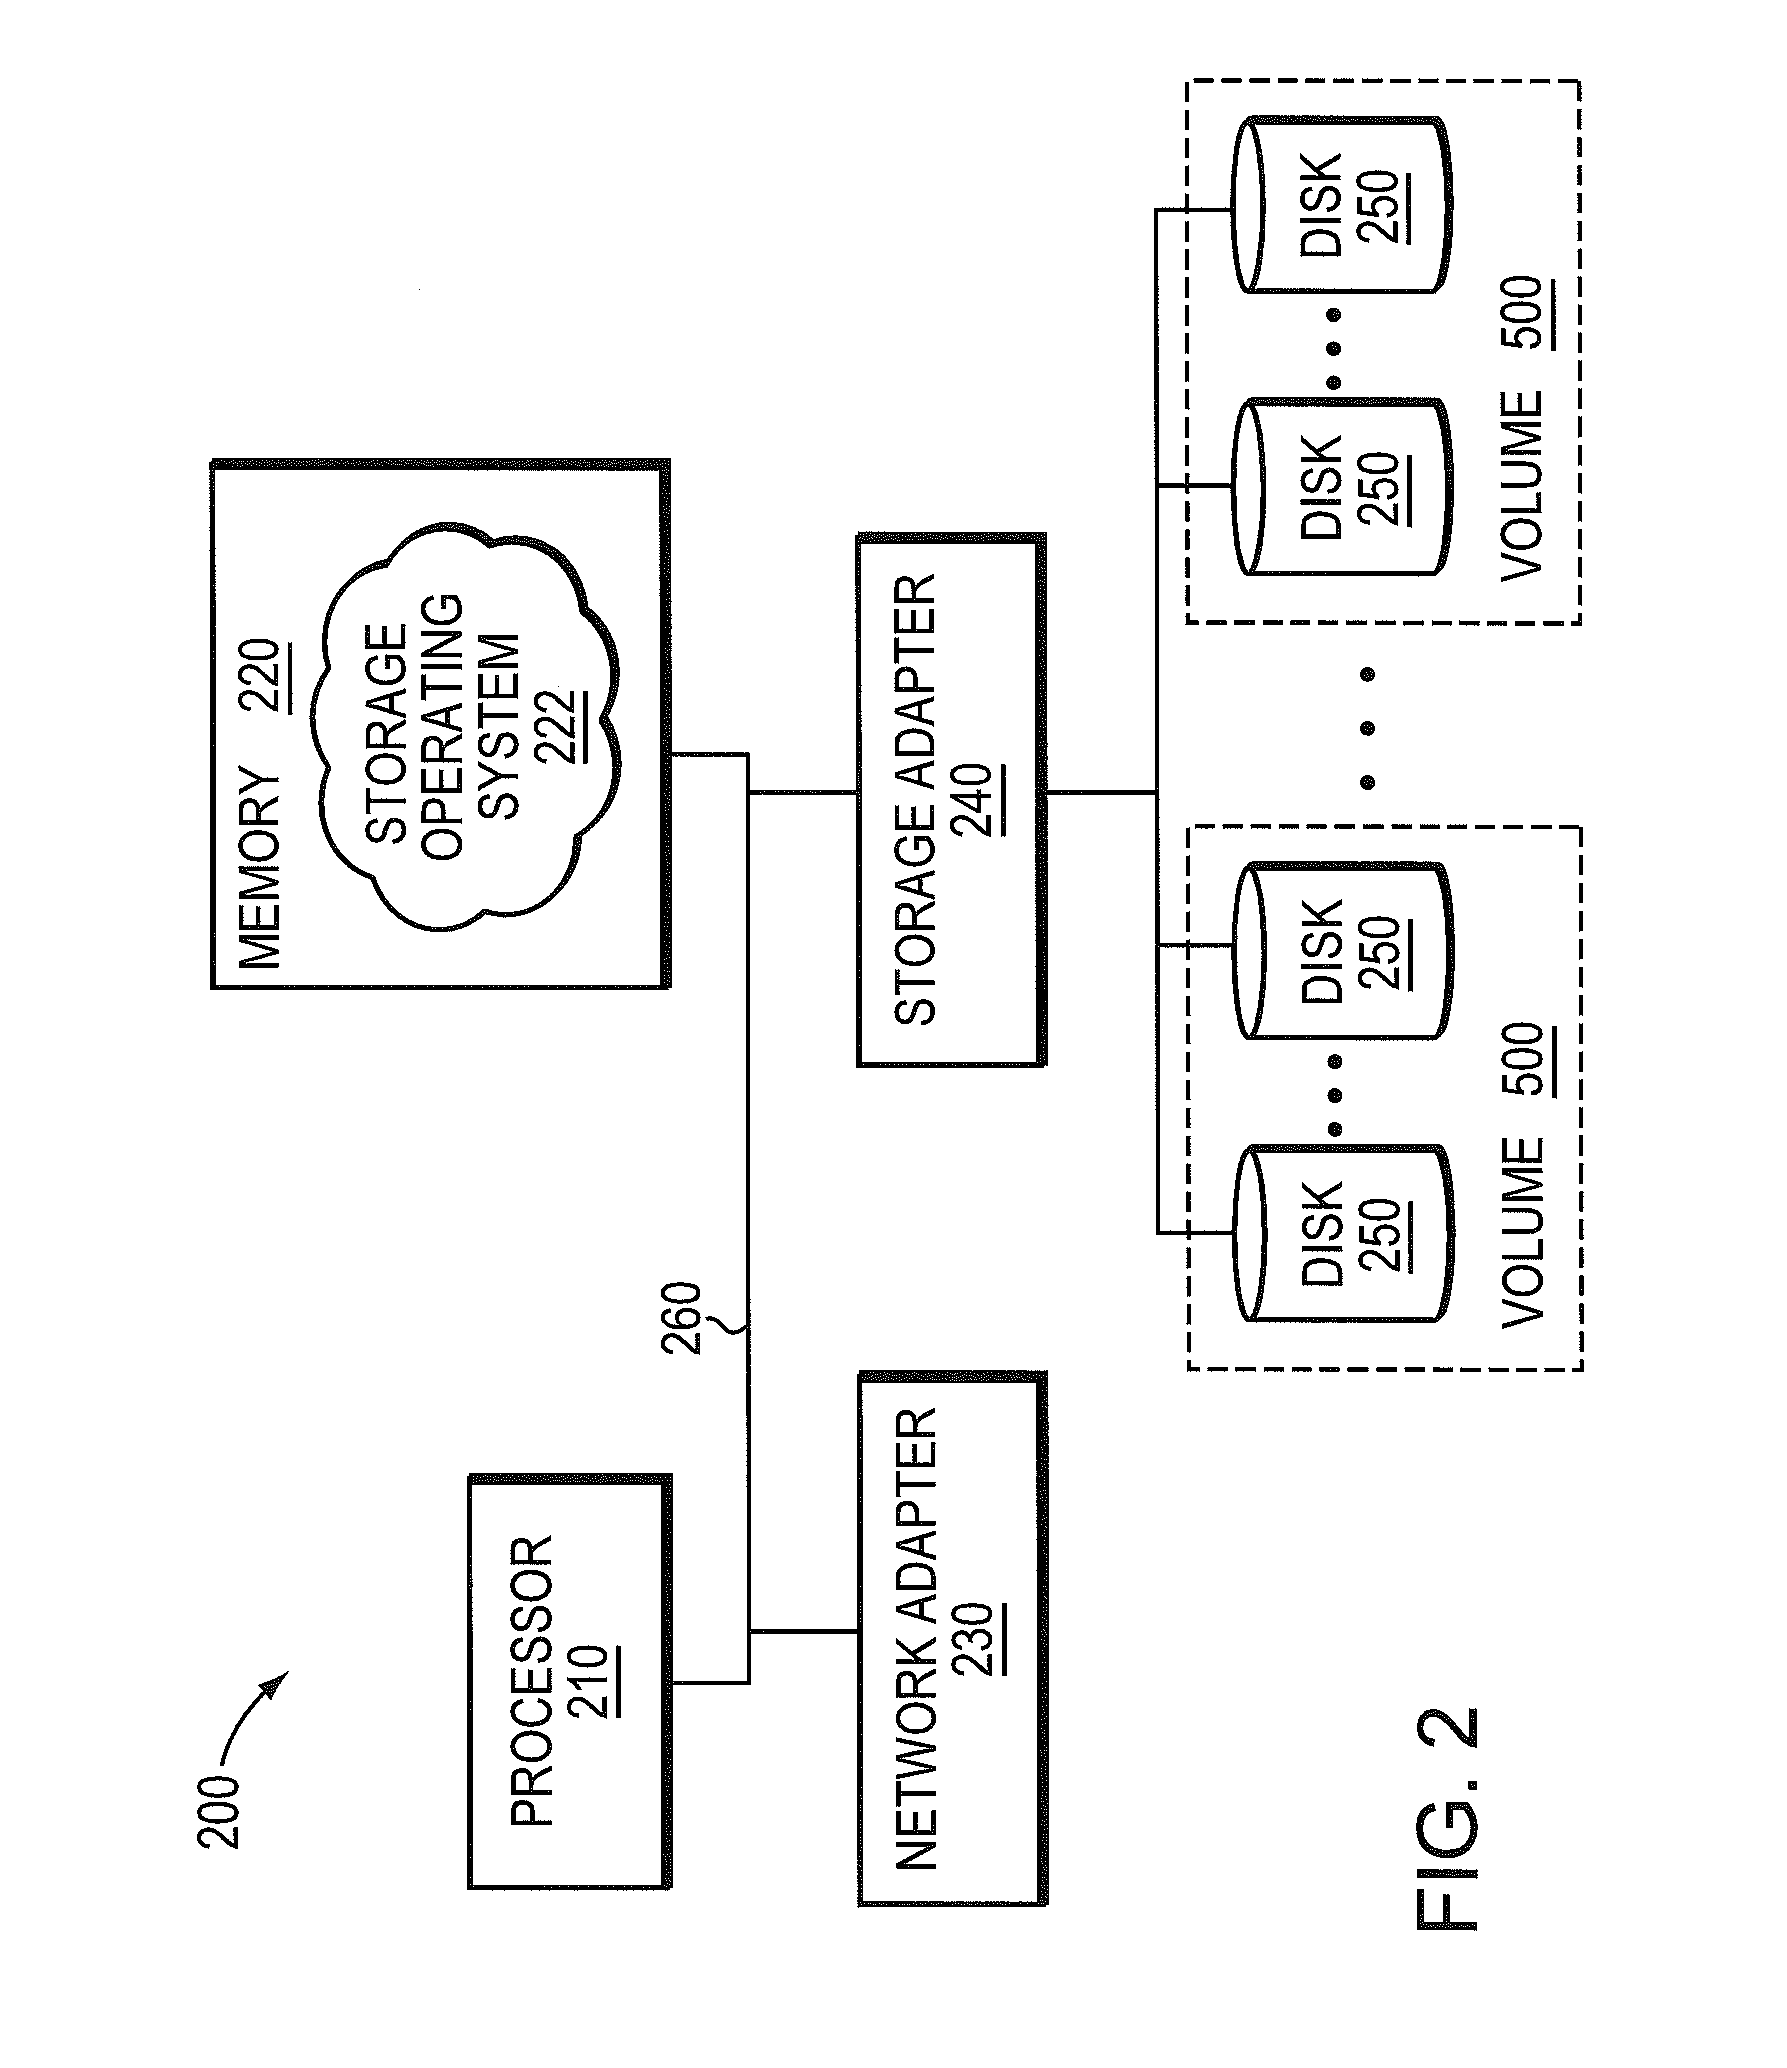 Object store architecture for distributed data processing system